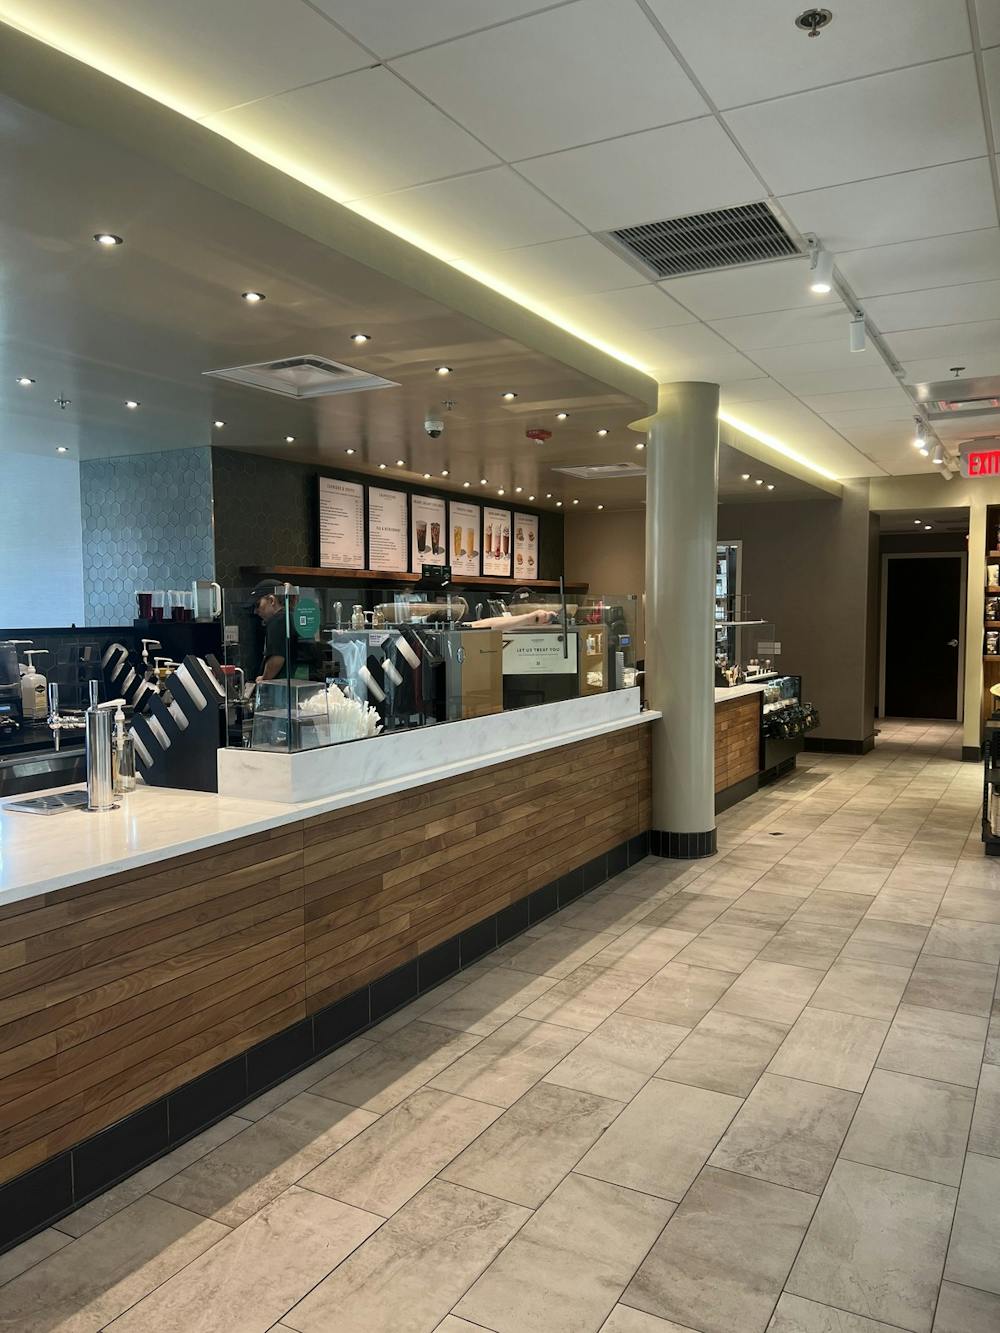 Many students find jobs on campus, including at the Shriver Starbucks.